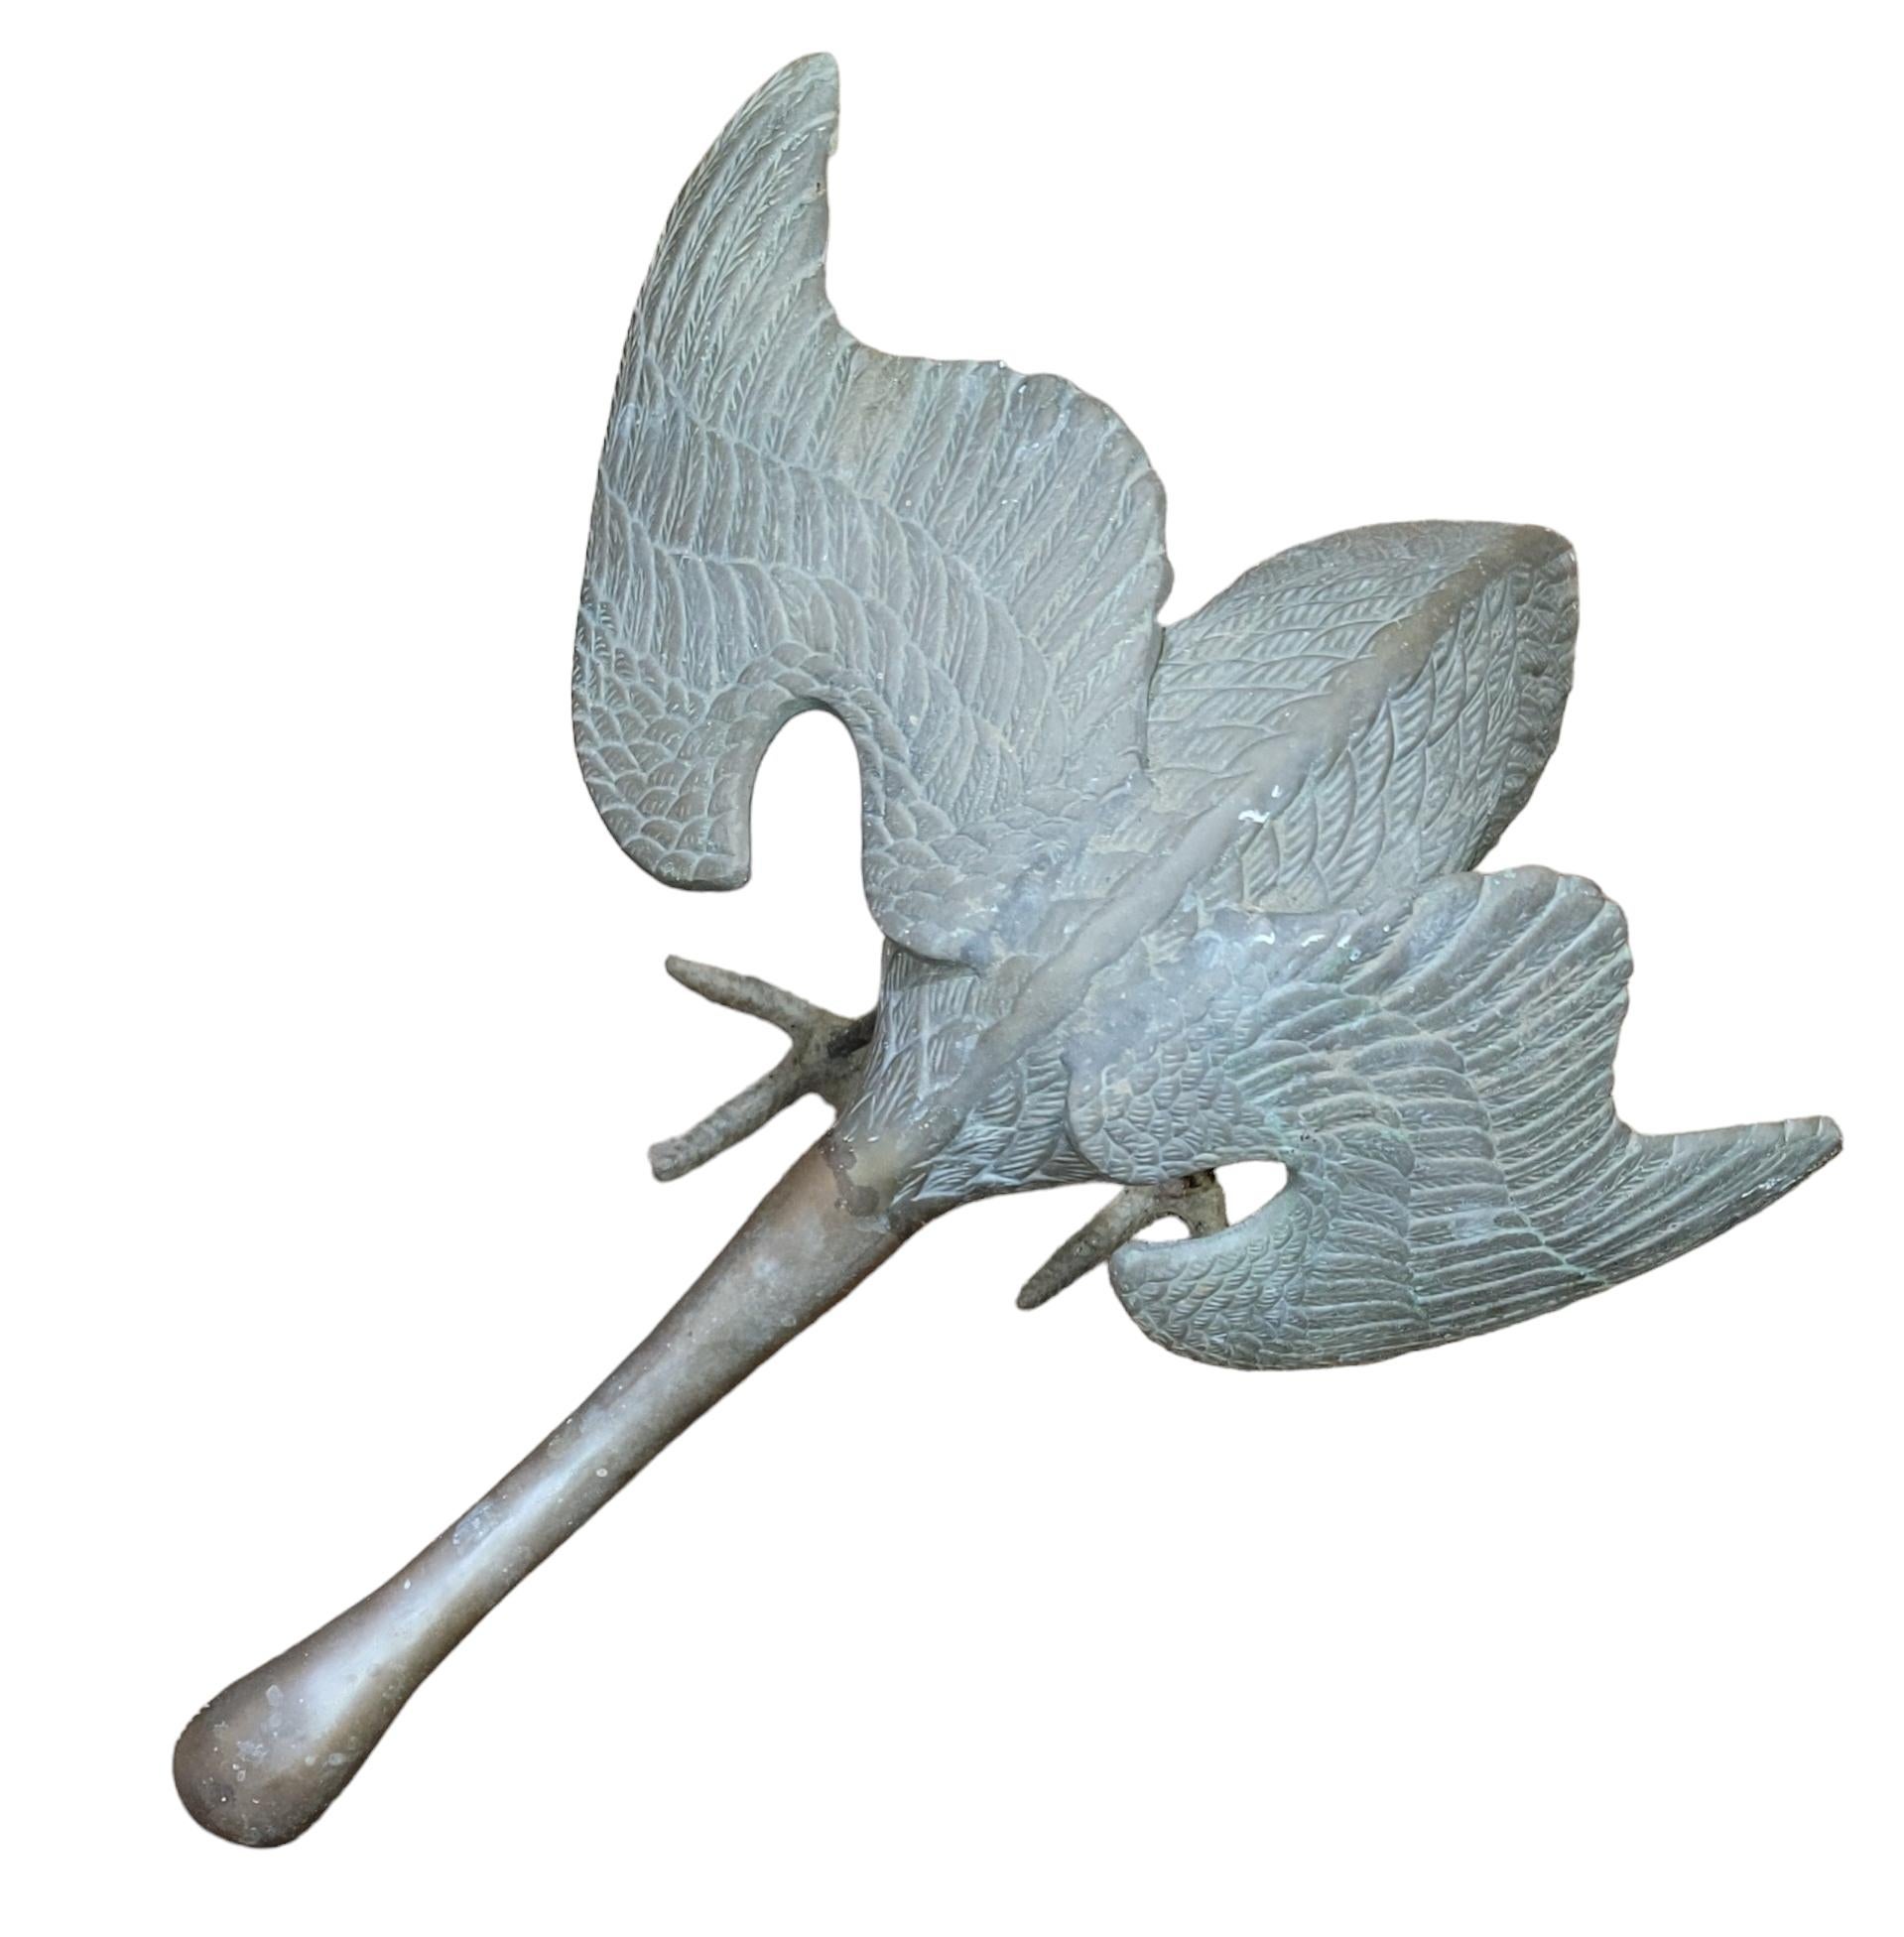 Large Bronze Bird Garden Statue. This animated statue shown a crane who is either landing or taking off for flight. The extended wing span of 15 inches' and the angle of the wings provides a sense of action upon the statue. The neck is slightly